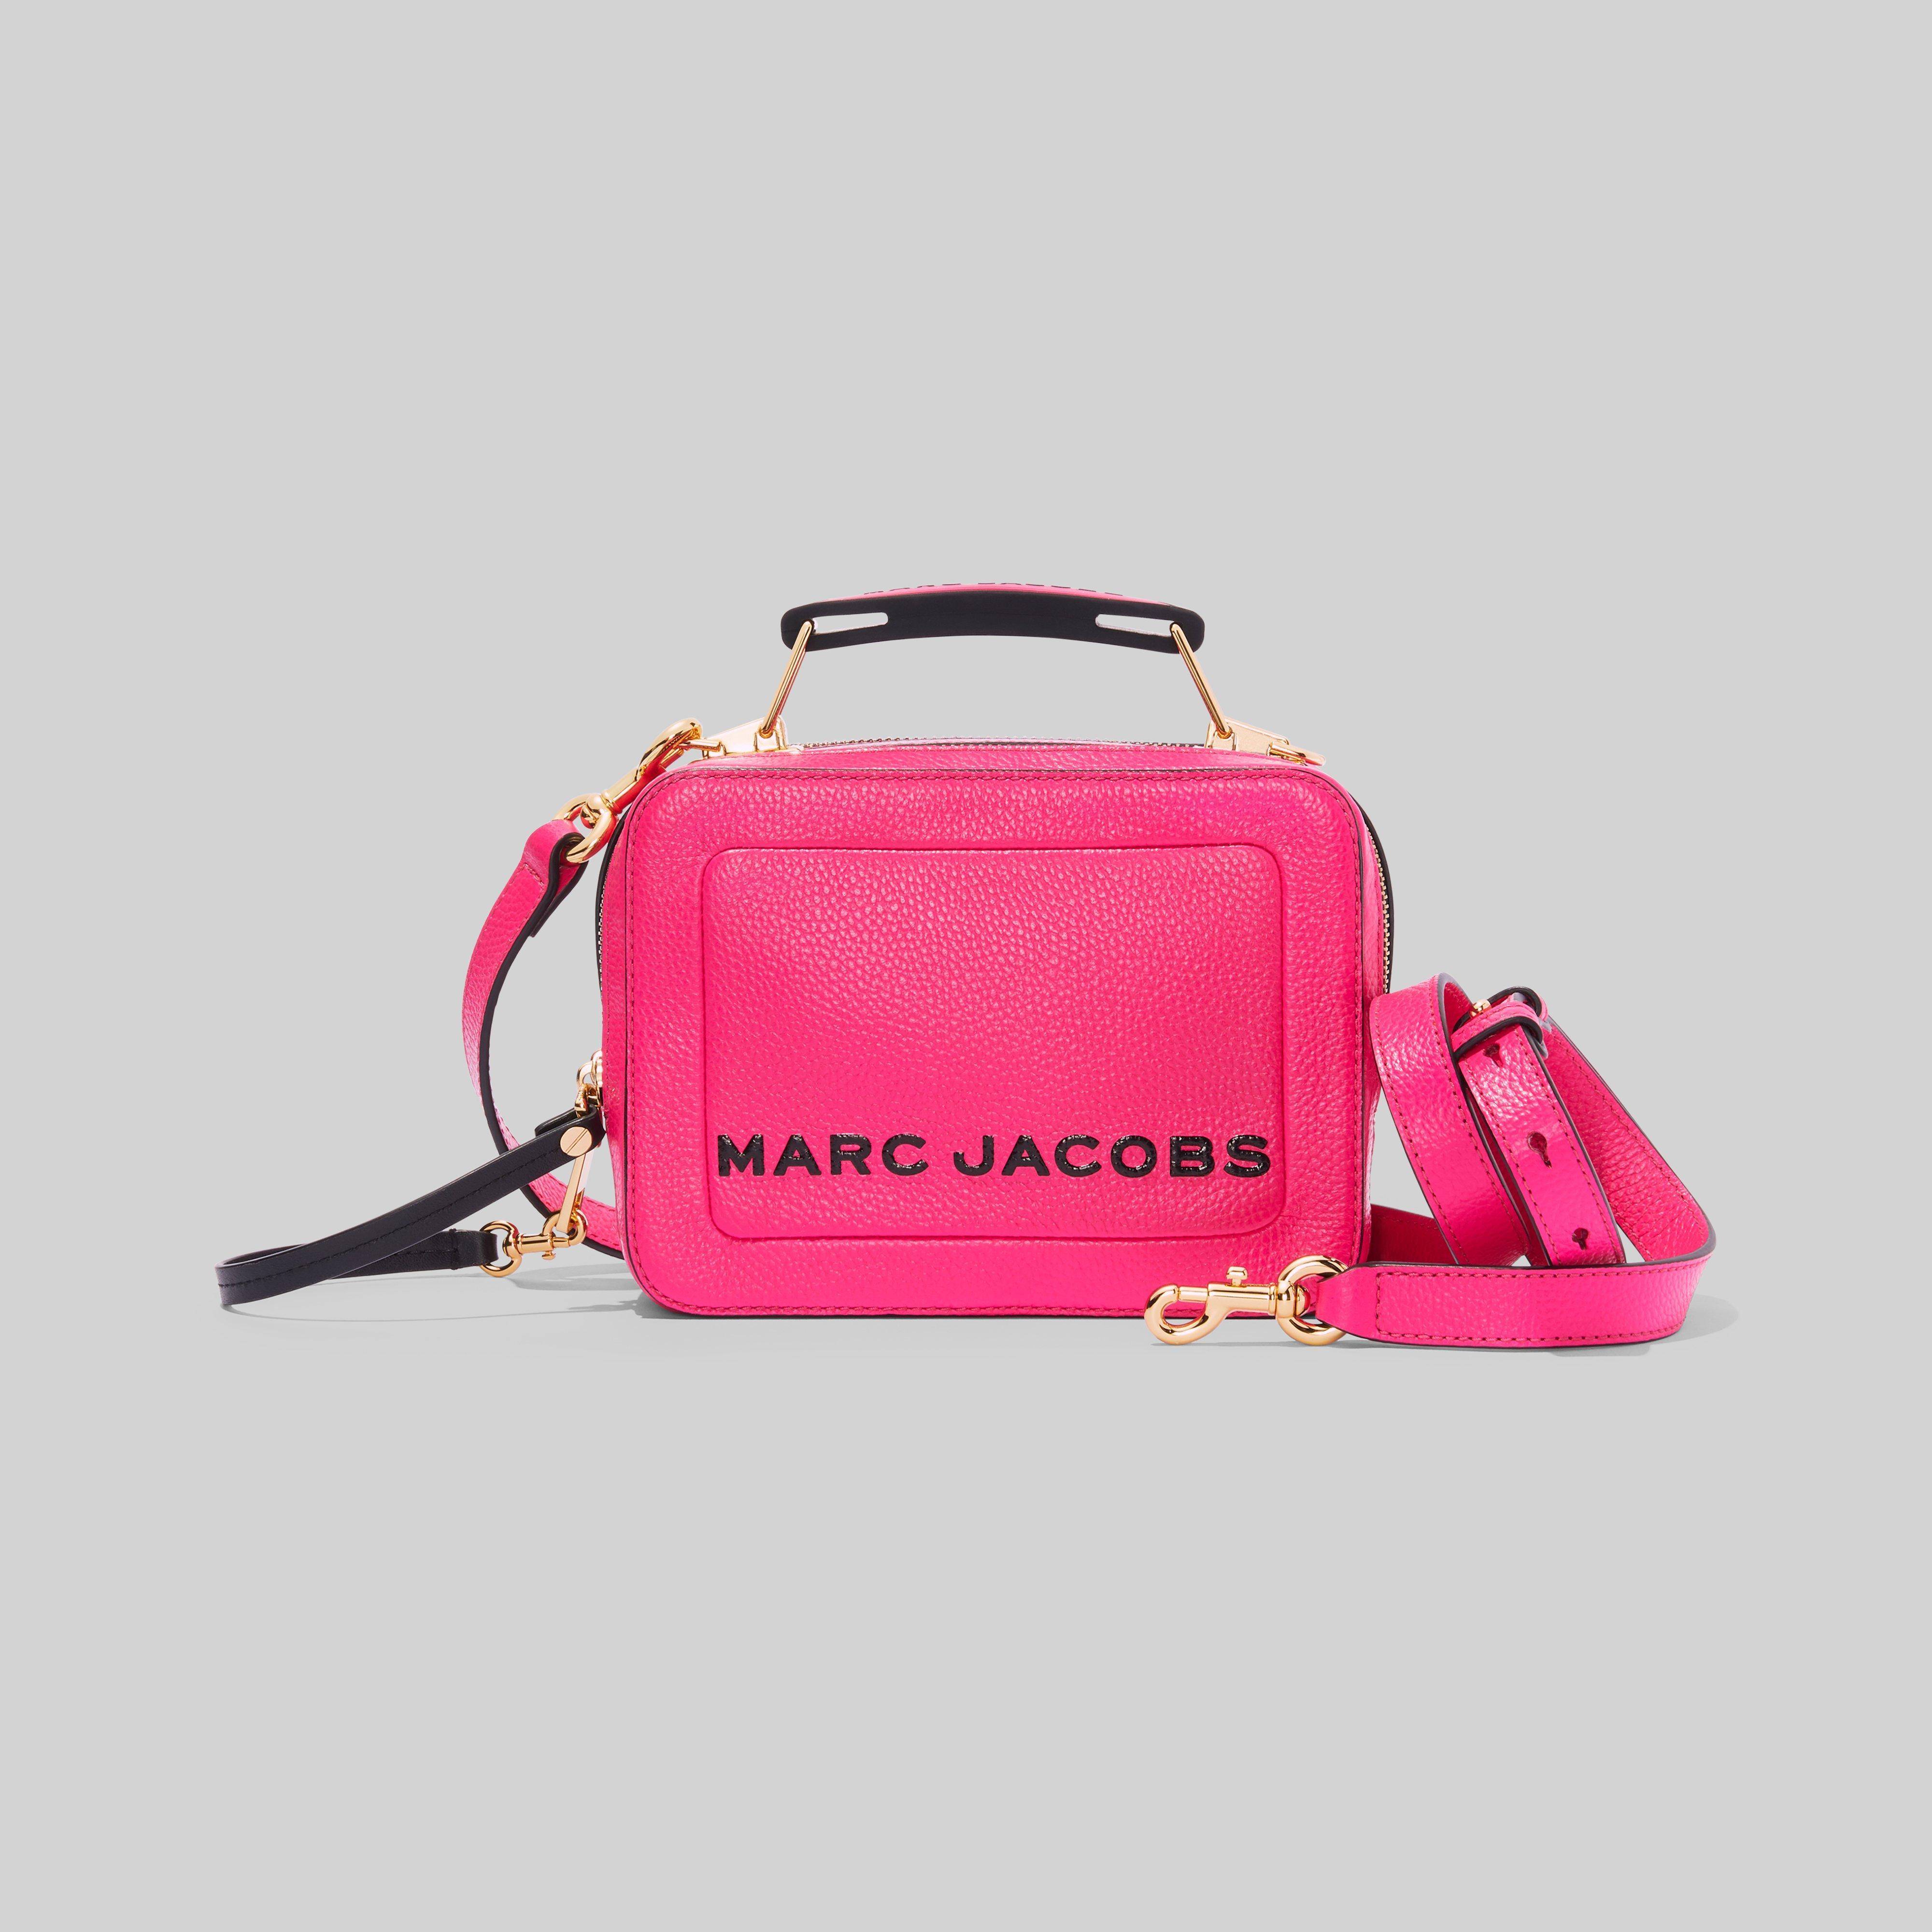 Marc Jacobs Leather The Textured Mini Box Bag in Pink - Lyst